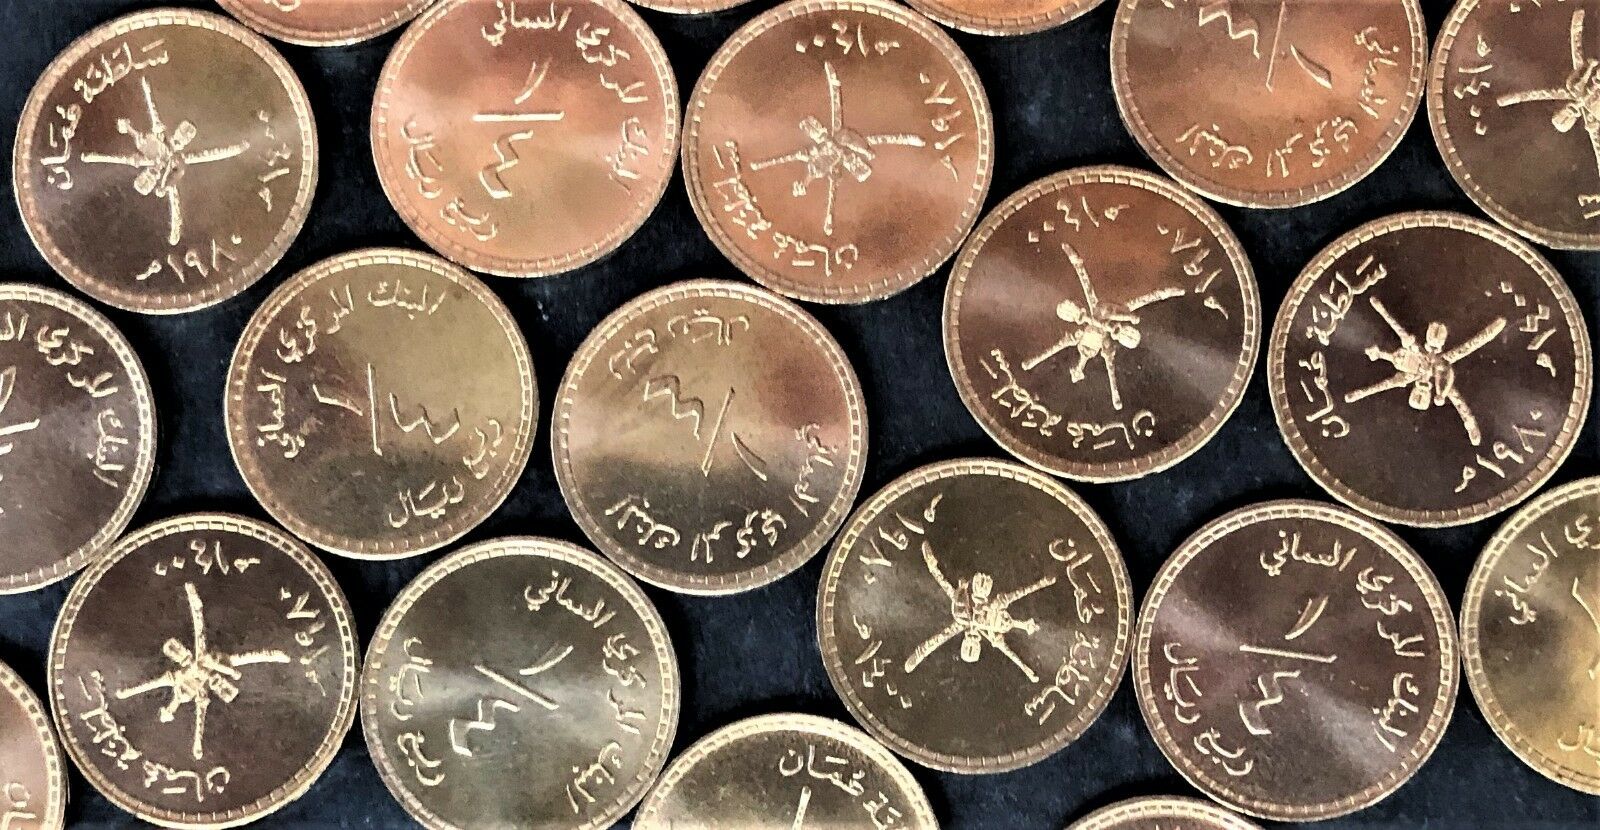 WHOLESALE 200 OMAN KM # 66 UNC COINS of AH 1400 / 1980 LAST ISSUED 1/4 RIAL